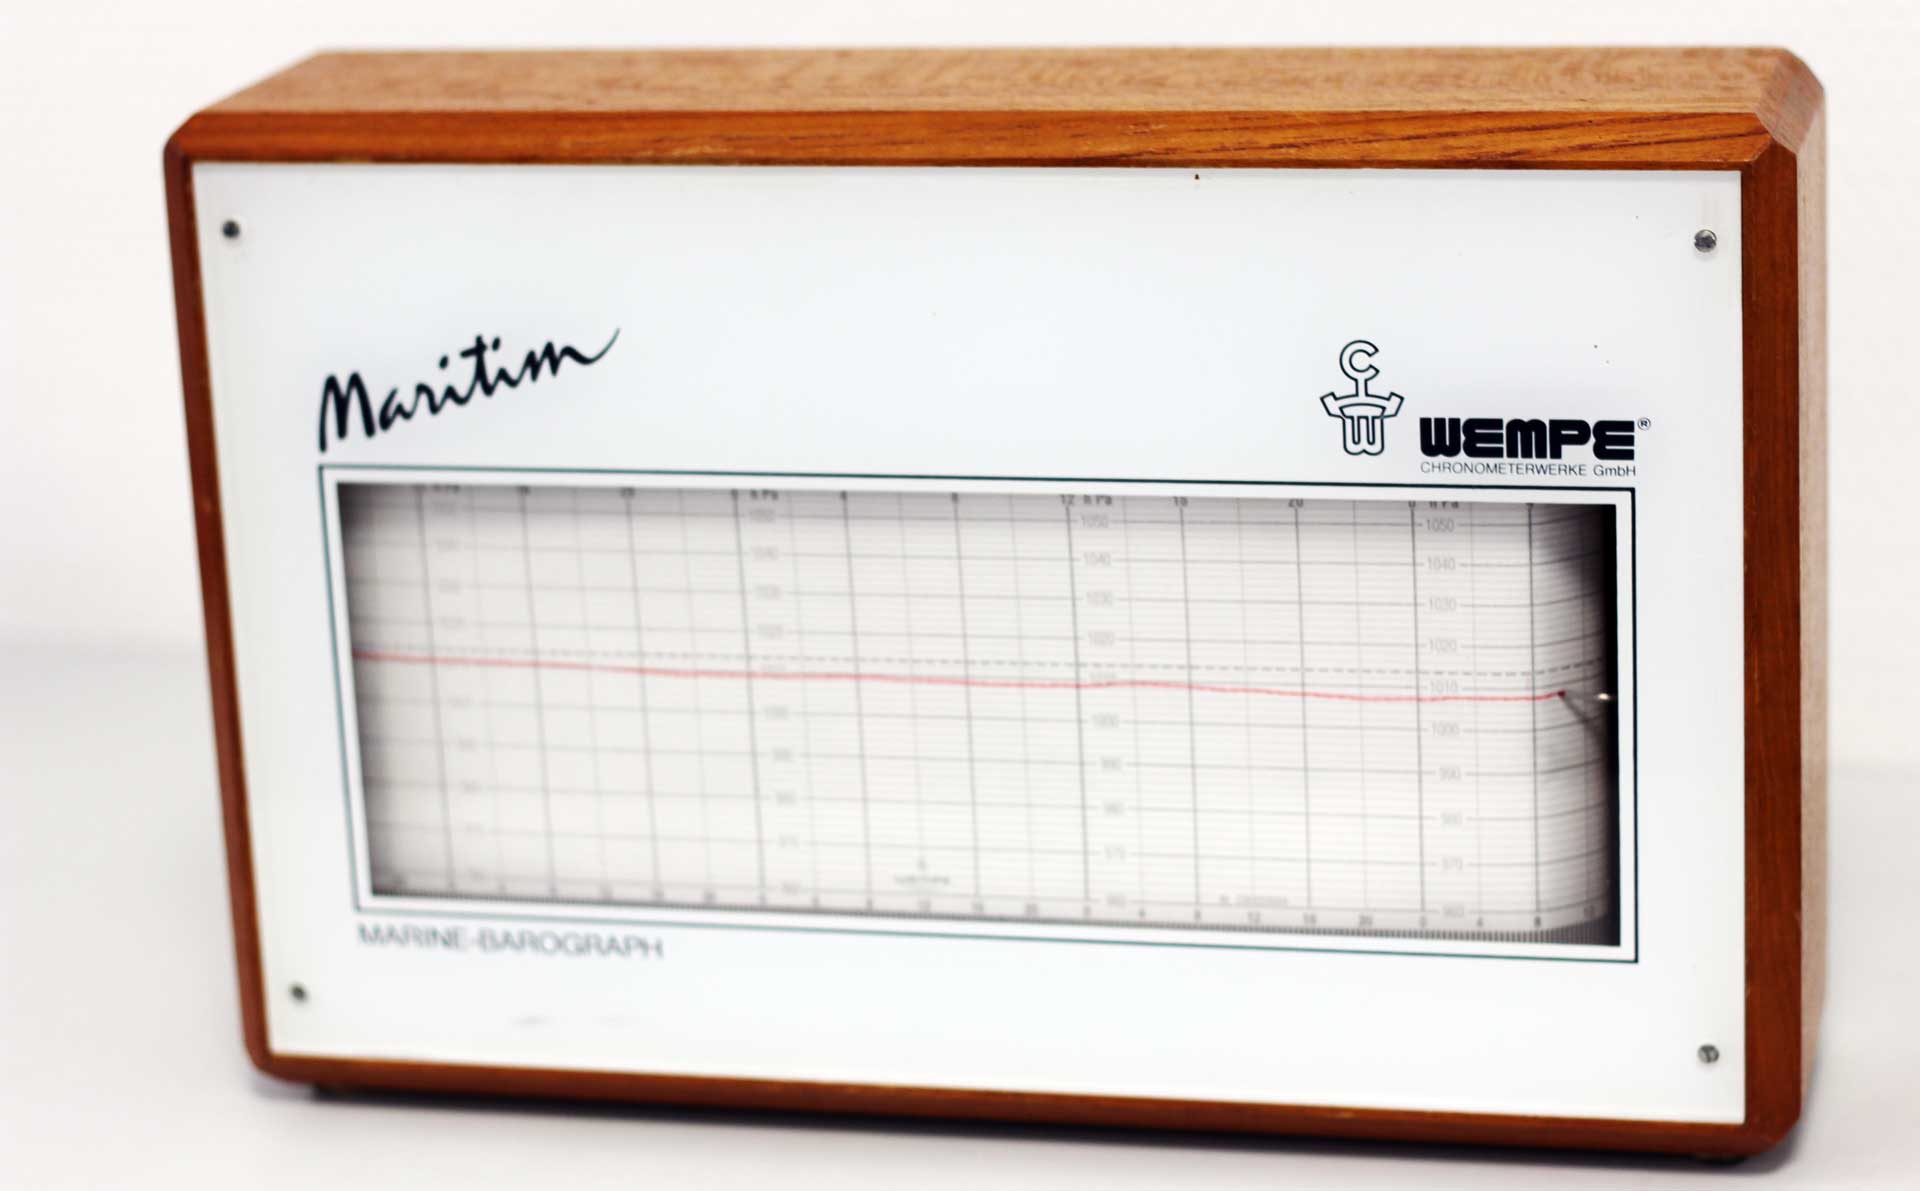 WEMPE also built Barographs which are still working today.